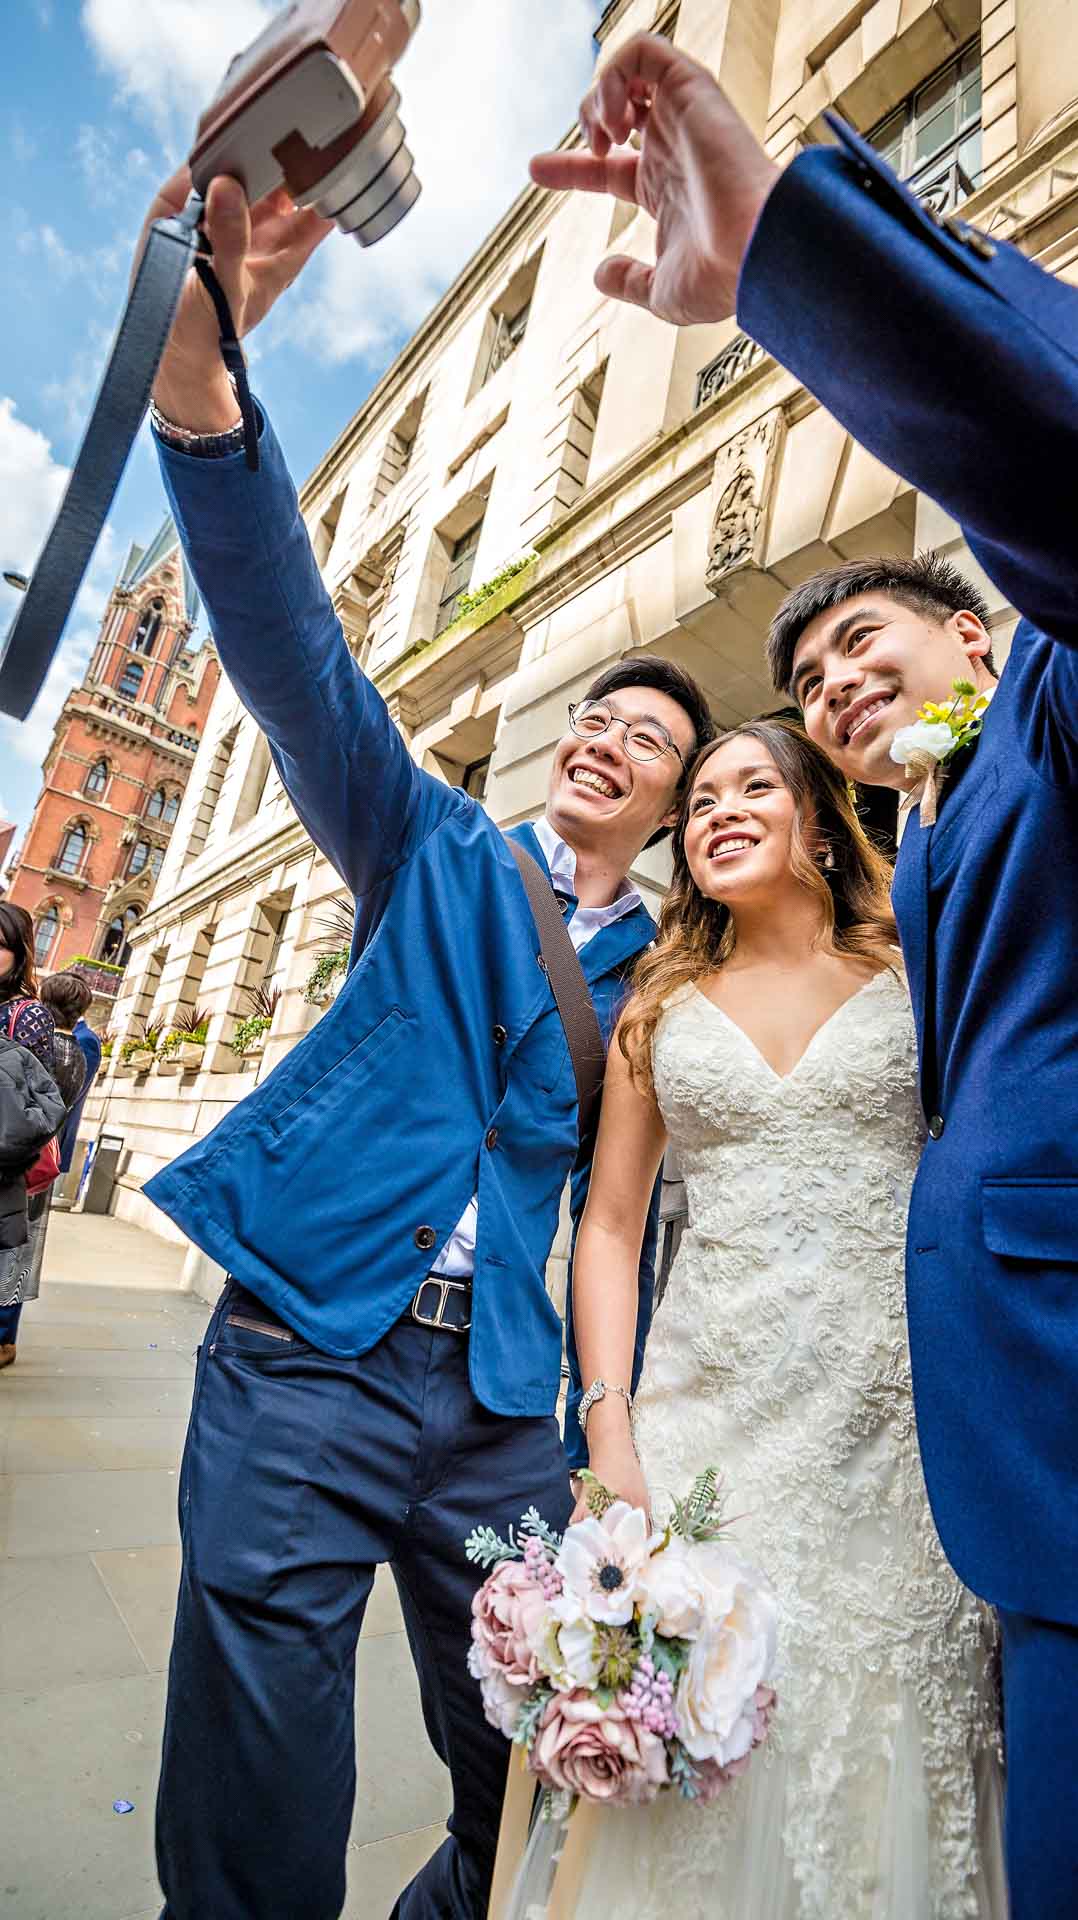 Selfie of couple with male guest taken at London wedding